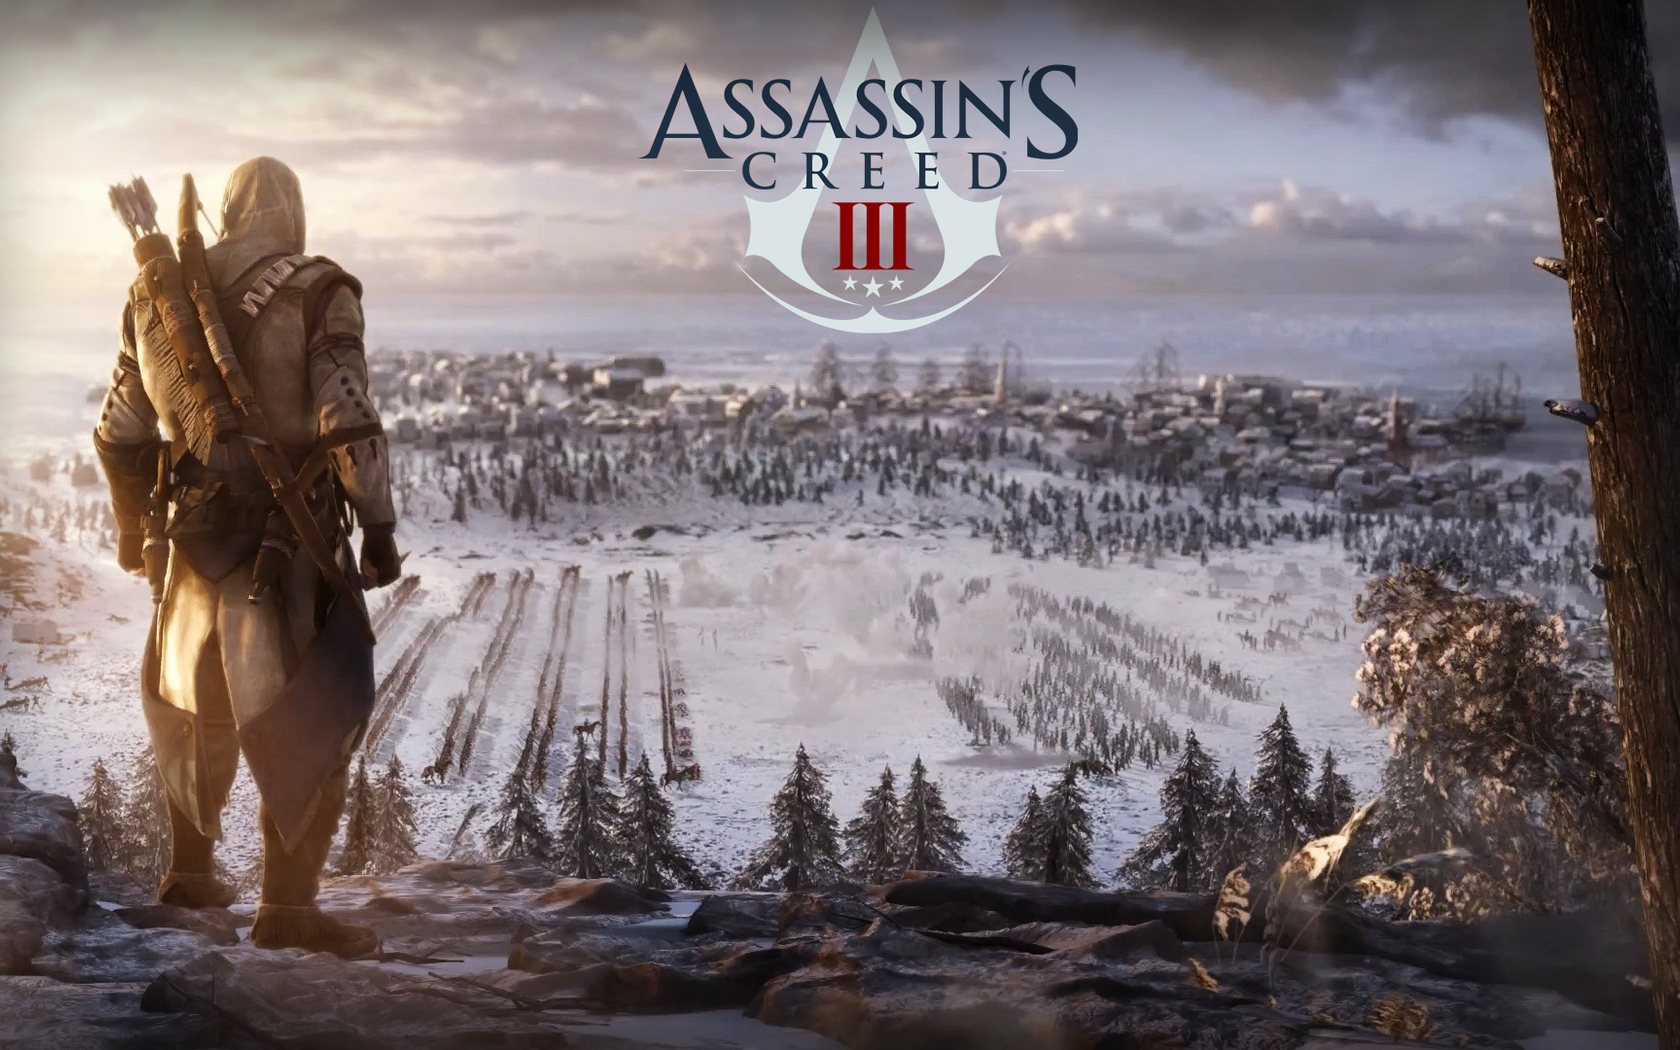 video game, assassin's creed iii, assassin's creed 2160p